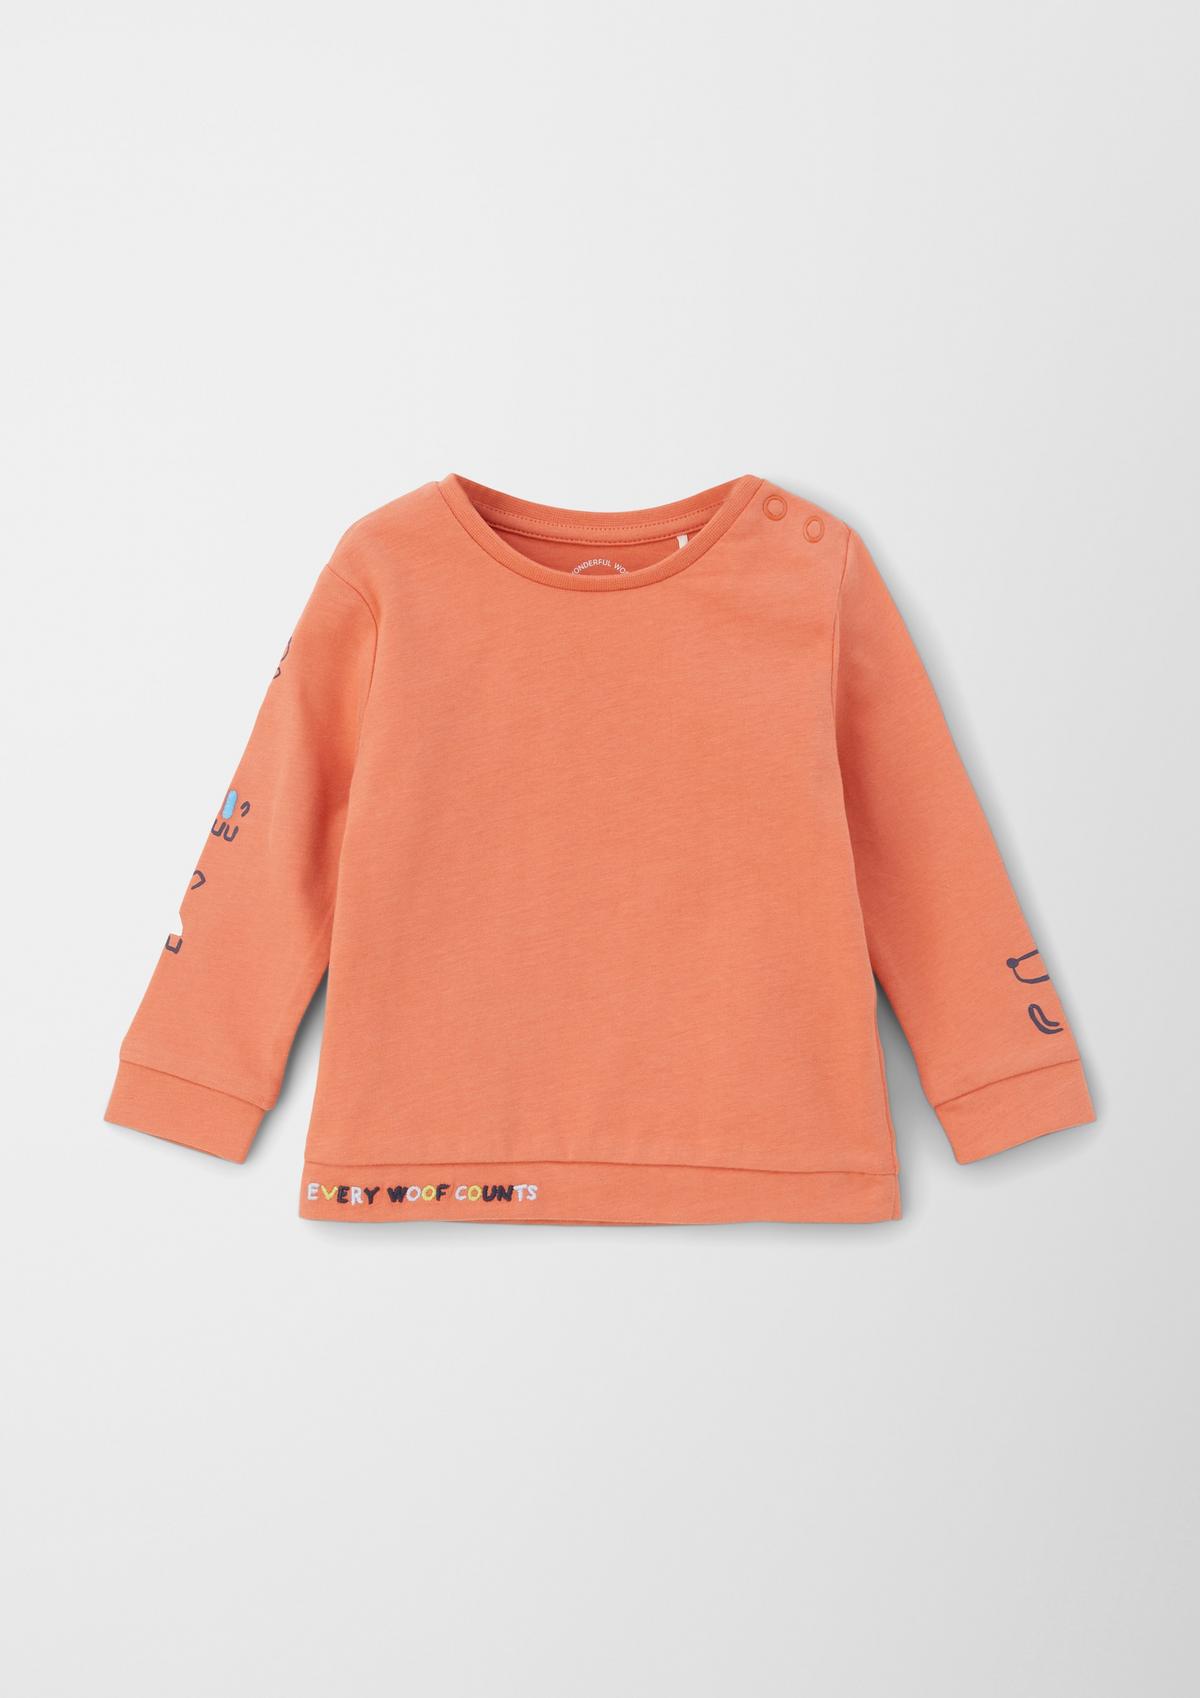 s.Oliver Long sleeve top with embroidery